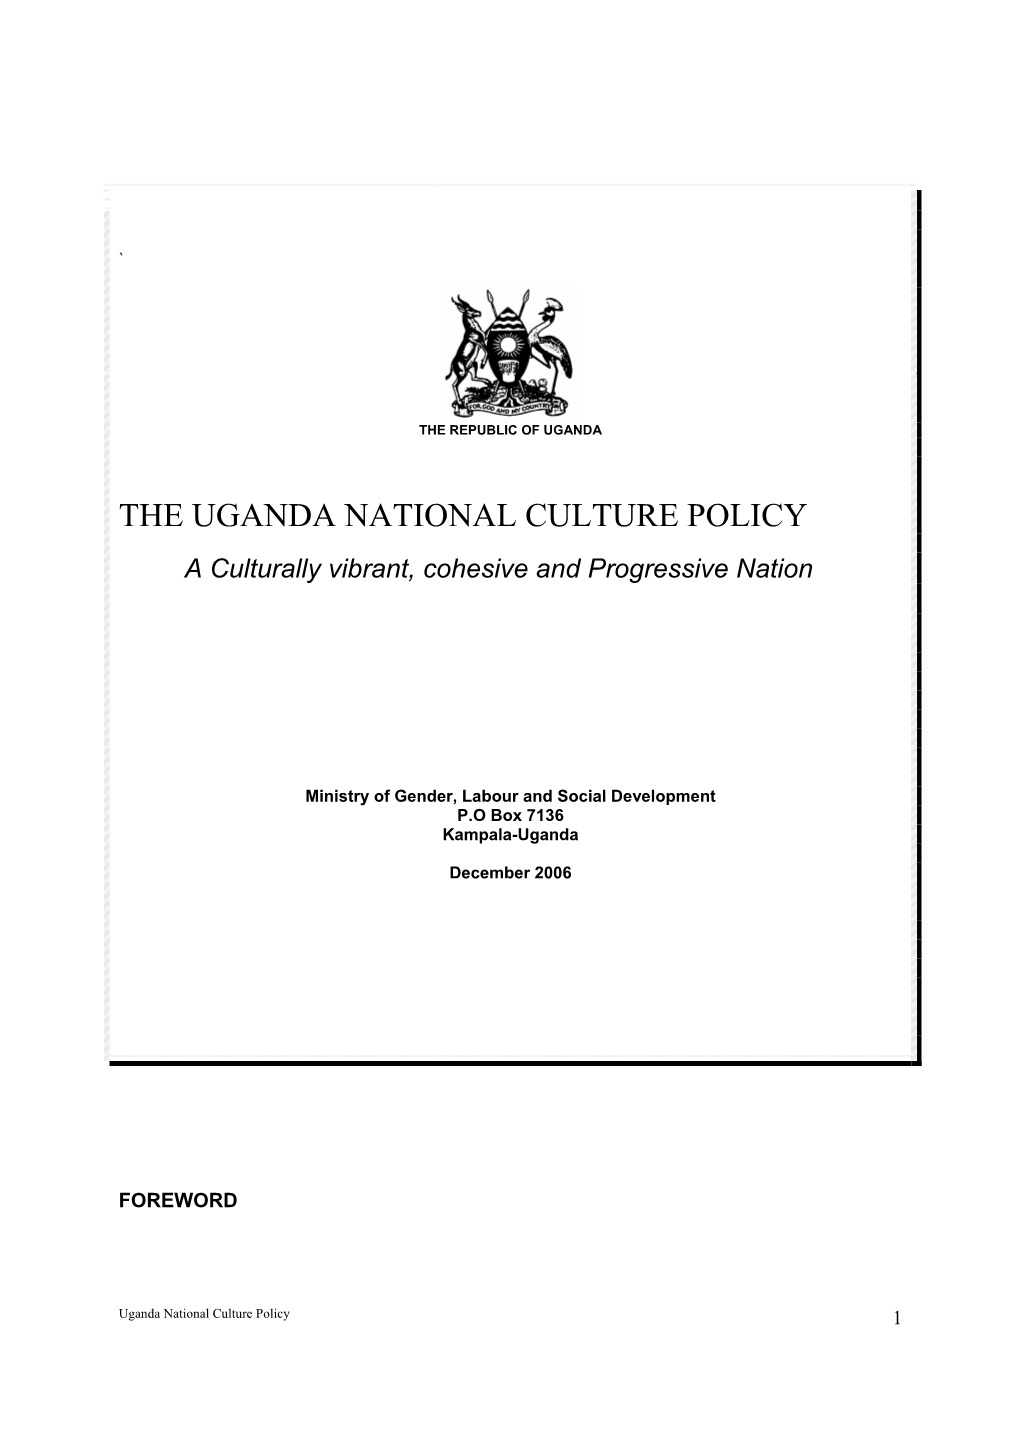 The Uganda National Culture Policy